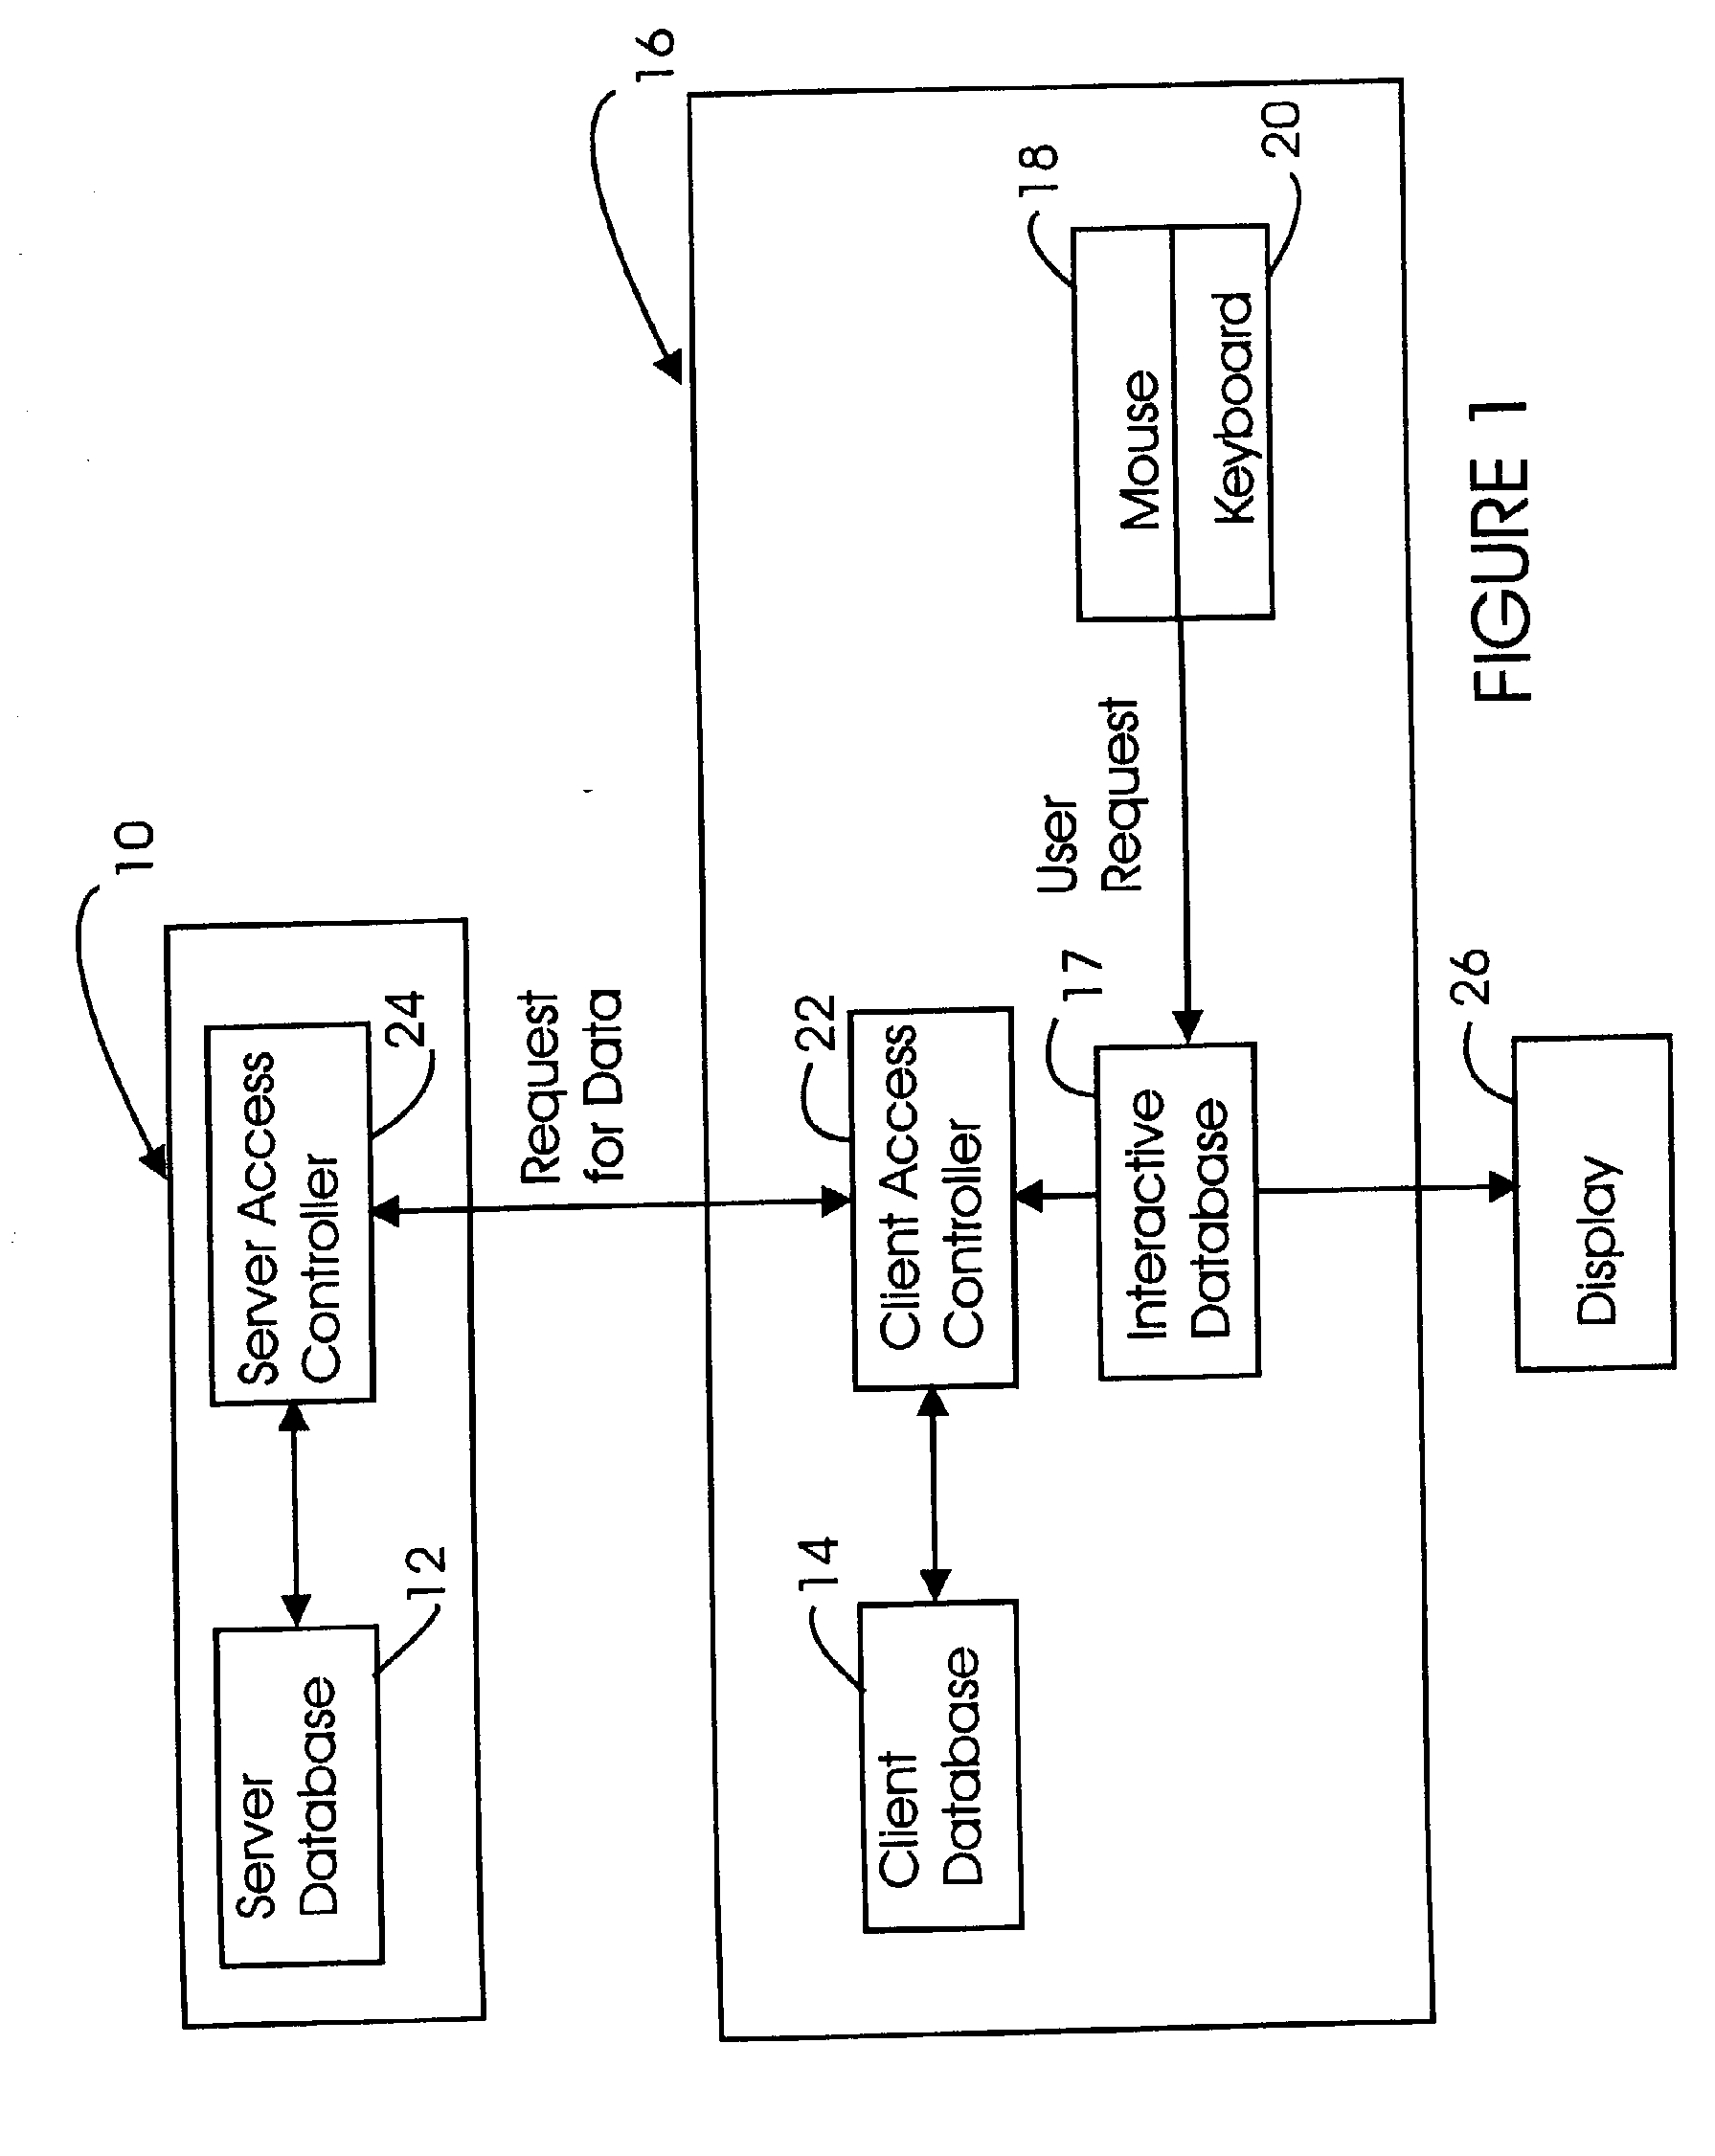 Method and system for providing on-line interactivity over a server-client network